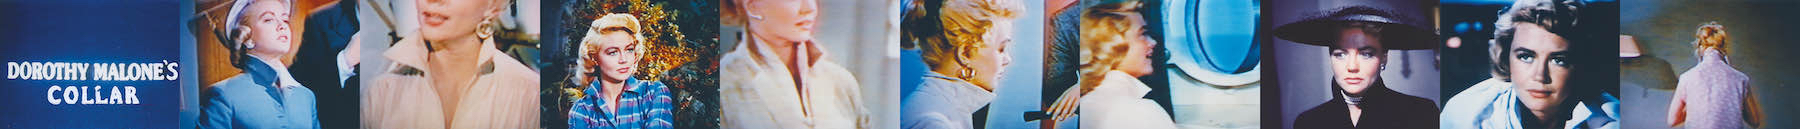 Dorothy Malone's Collar, a photo collage by writer, filmmaker and artist John Waters